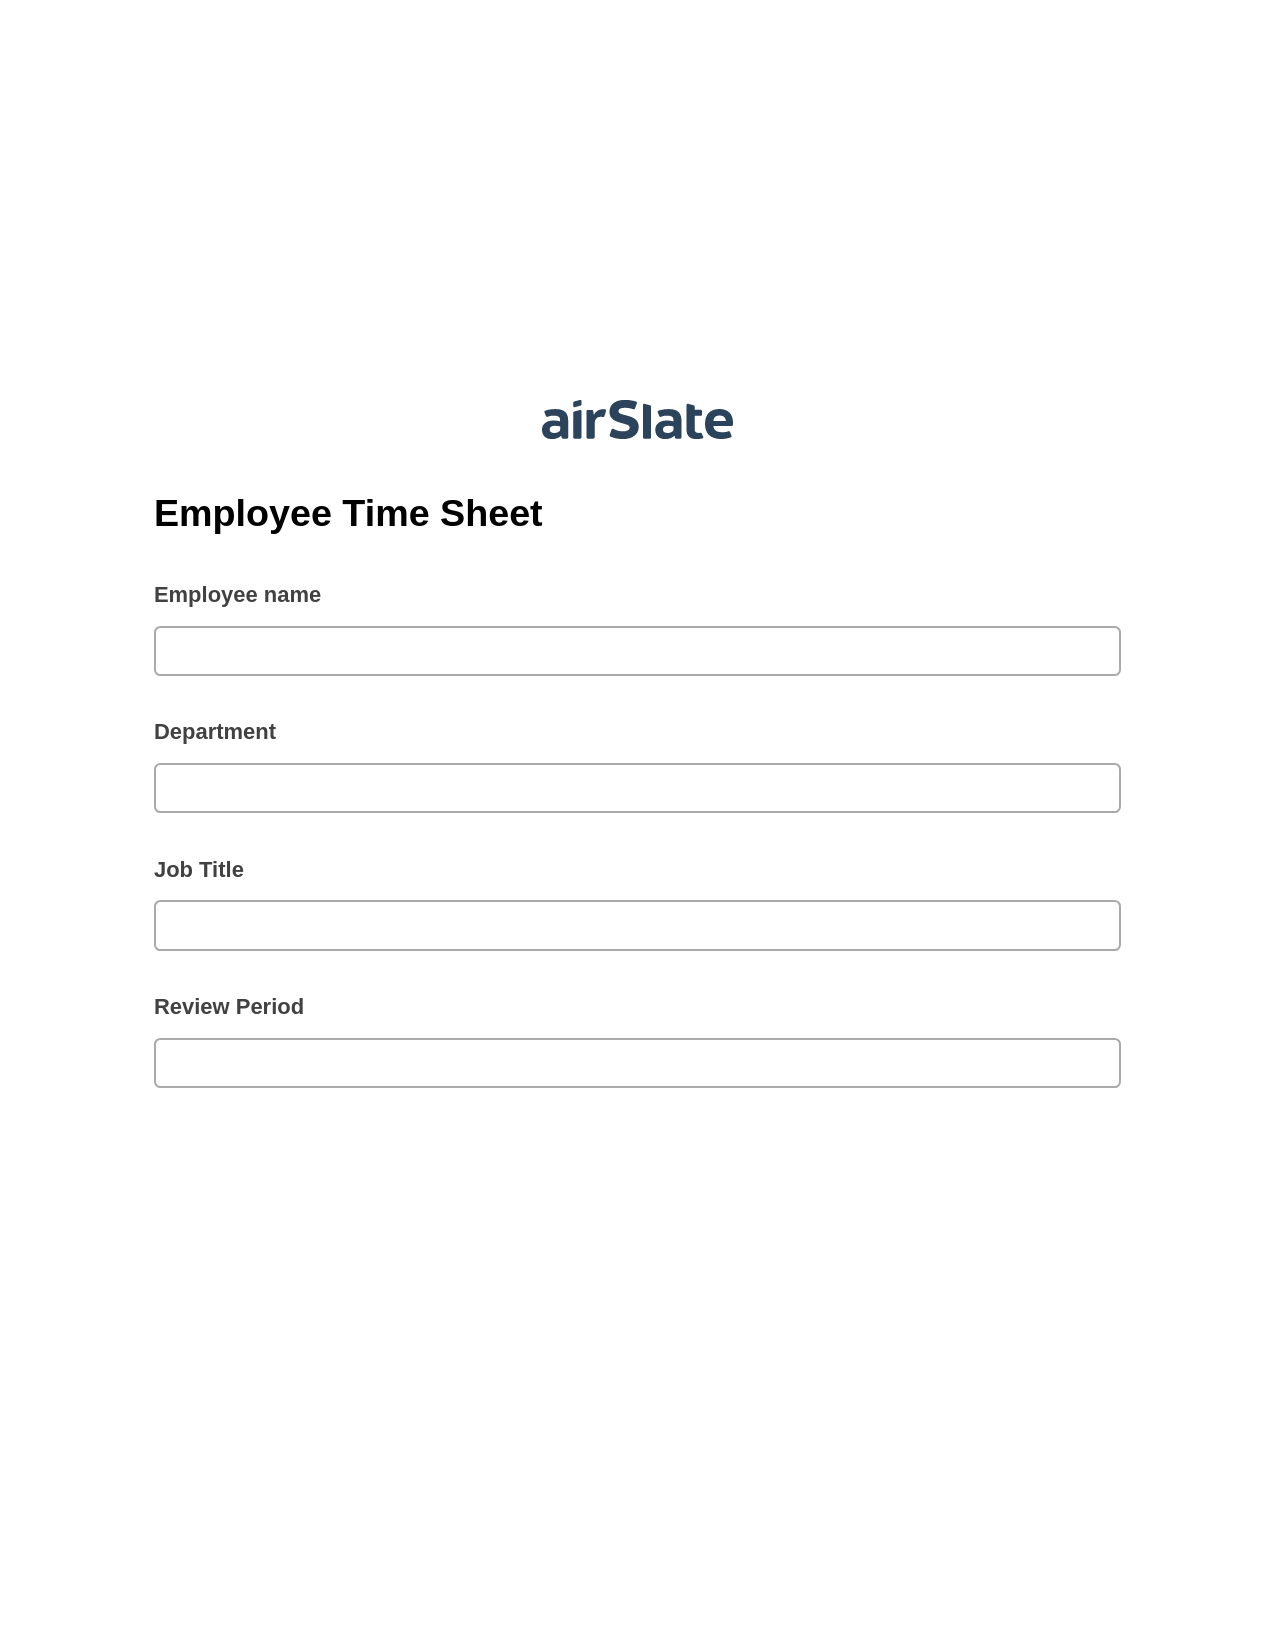 Employee Time Sheet Pre-fill Dropdowns from Airtable, Update Audit Trail Bot, Archive to Box Bot